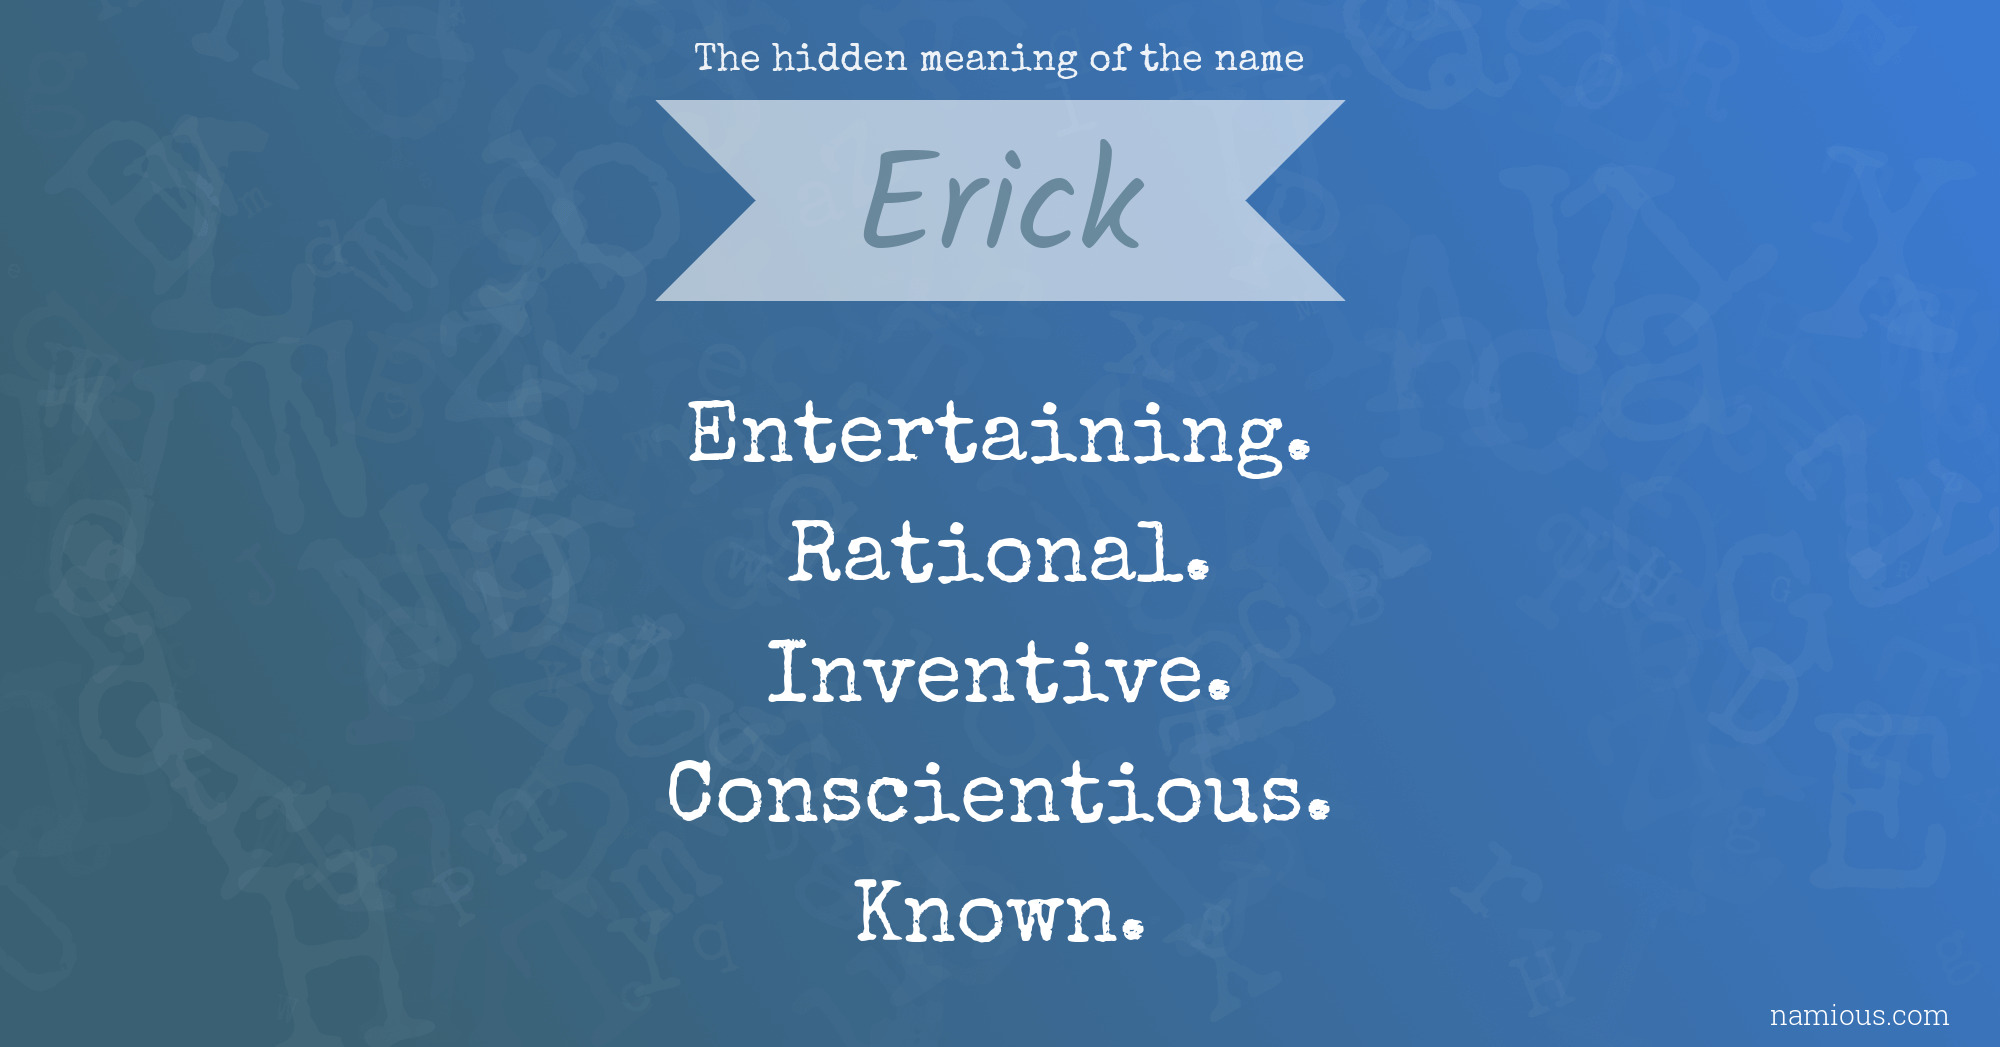 The hidden meaning of the name Erick